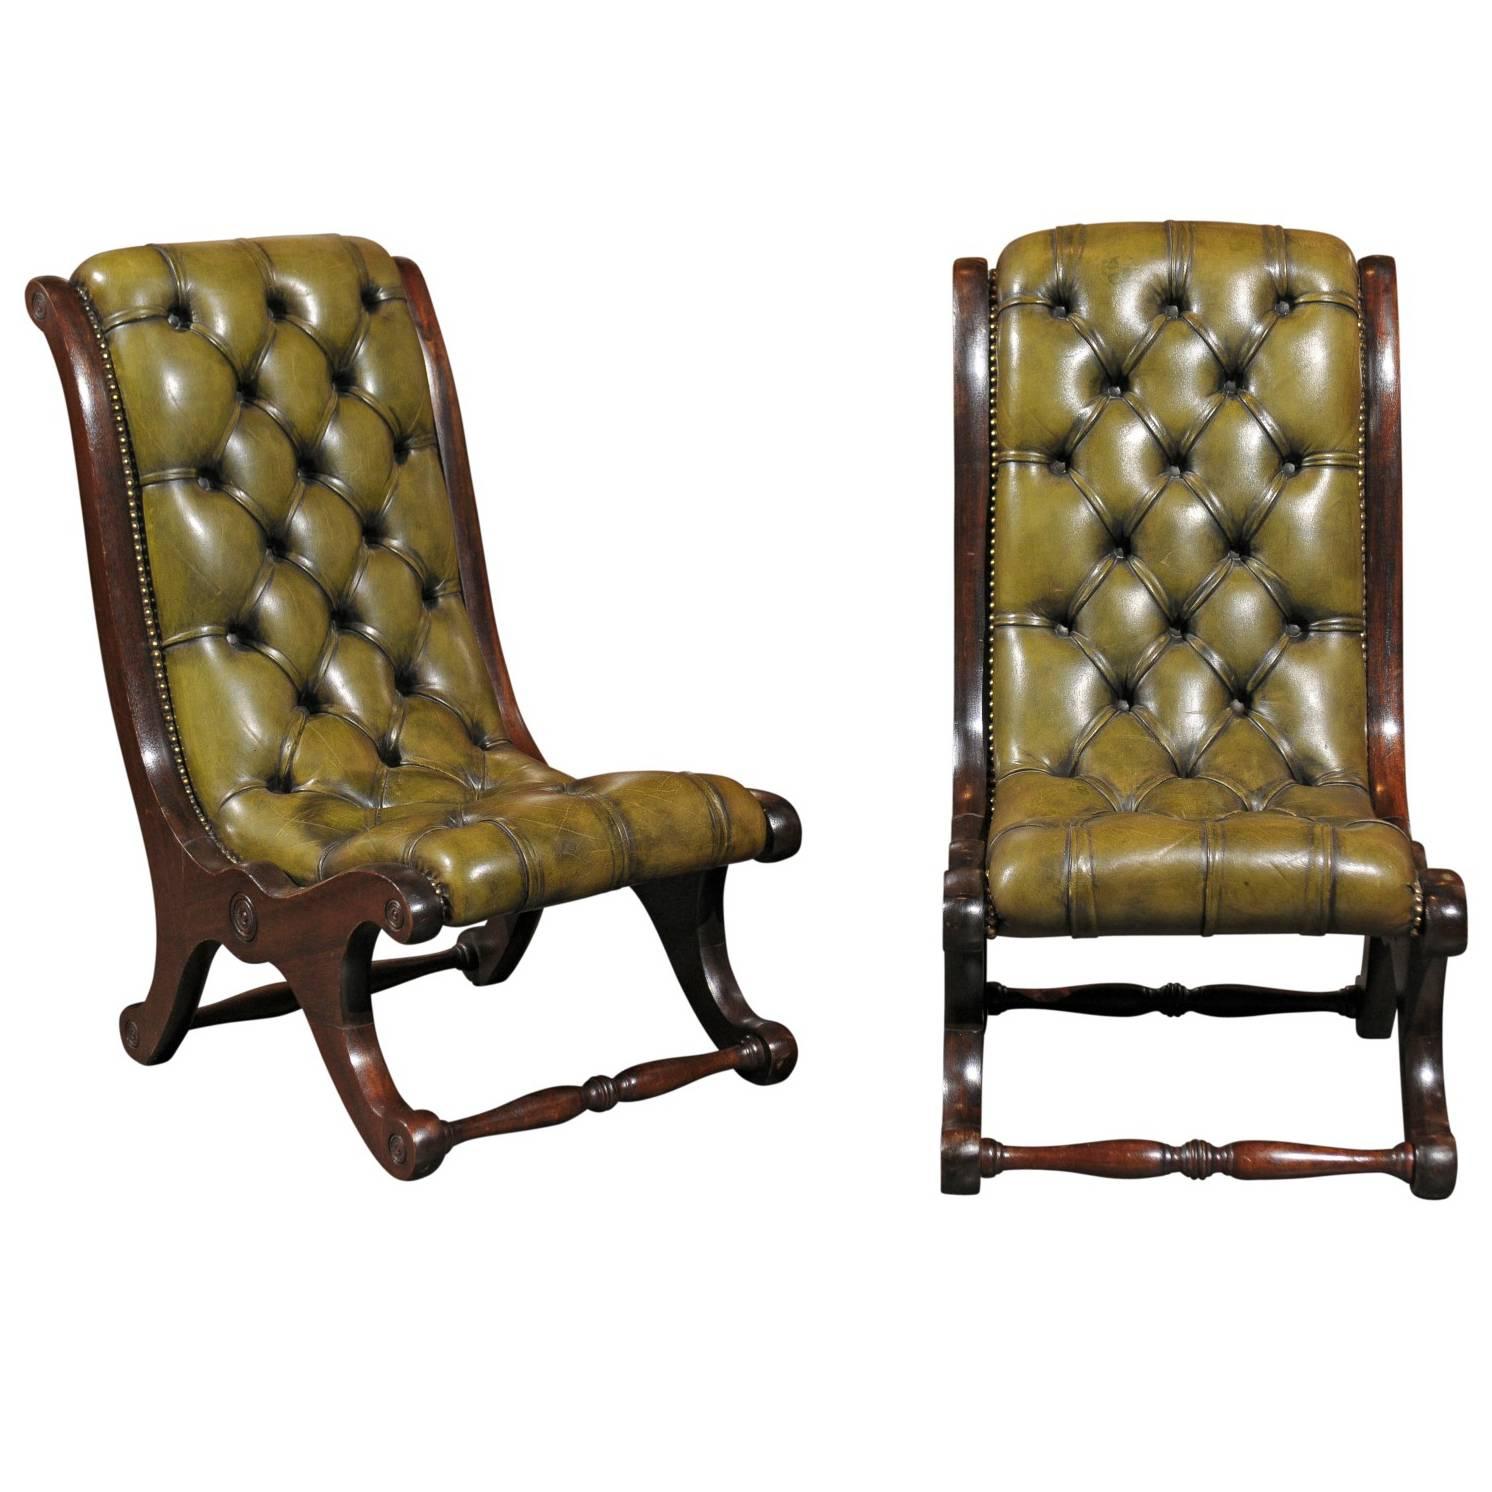 Pair of English Green Leather Turn of the Century Tufted Slipper Chairs